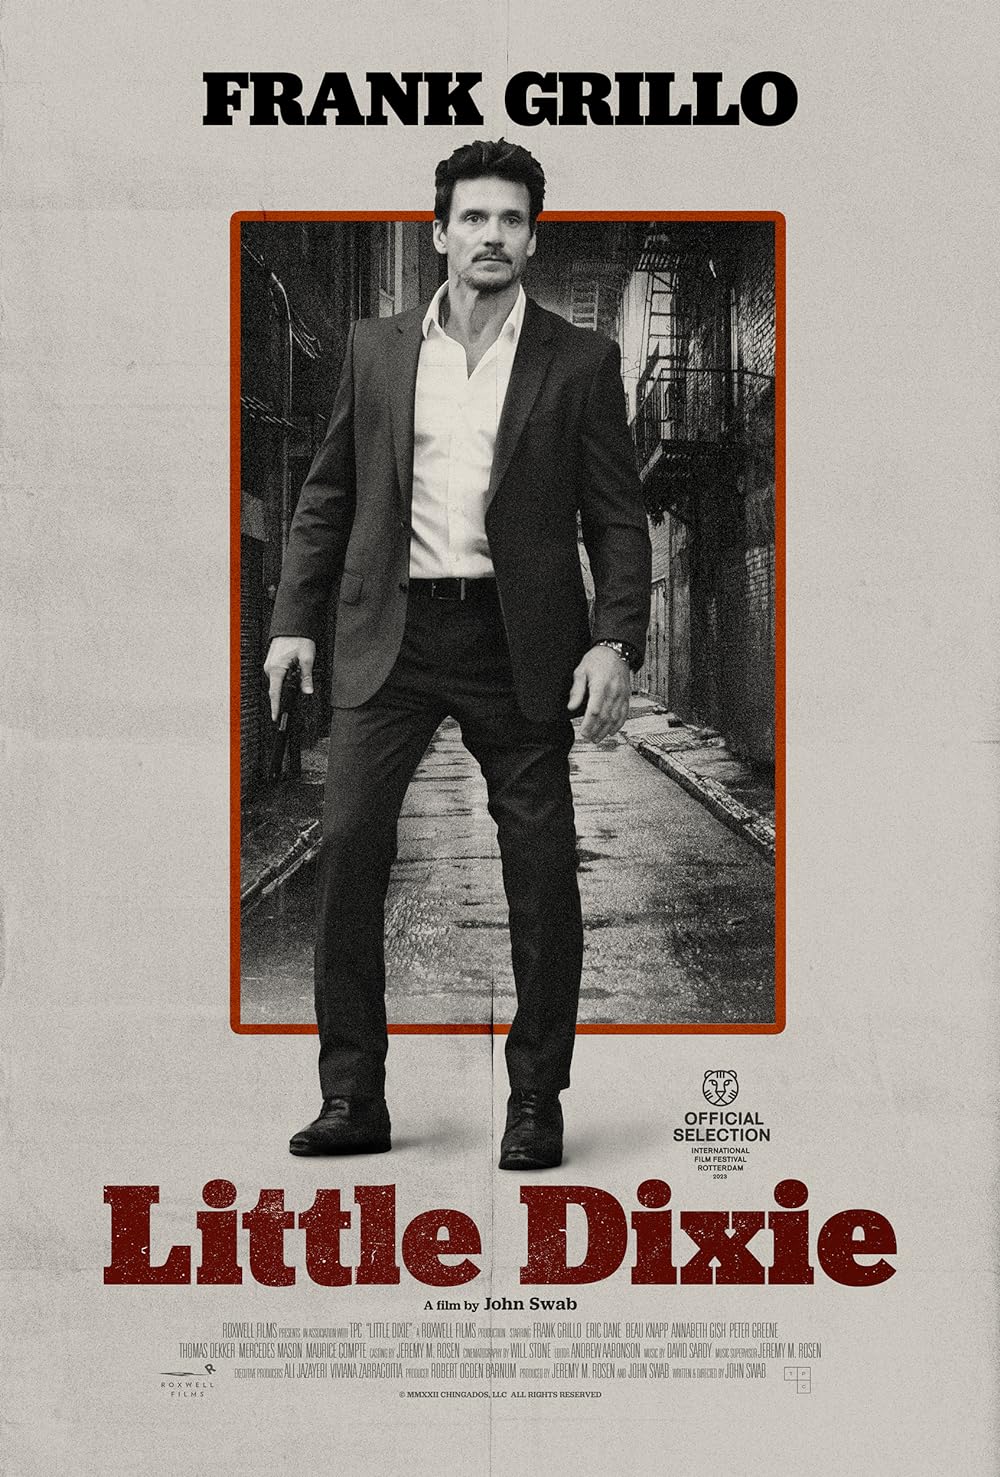 Little Dixie (December 28) - Streaming on NetflixLittle Dixie portrays Doc Alexander's tumultuous journey to protect his daughter amidst a failed agreement between a governor and a narcotics kingpin, diving into ethical complexities and intense action.